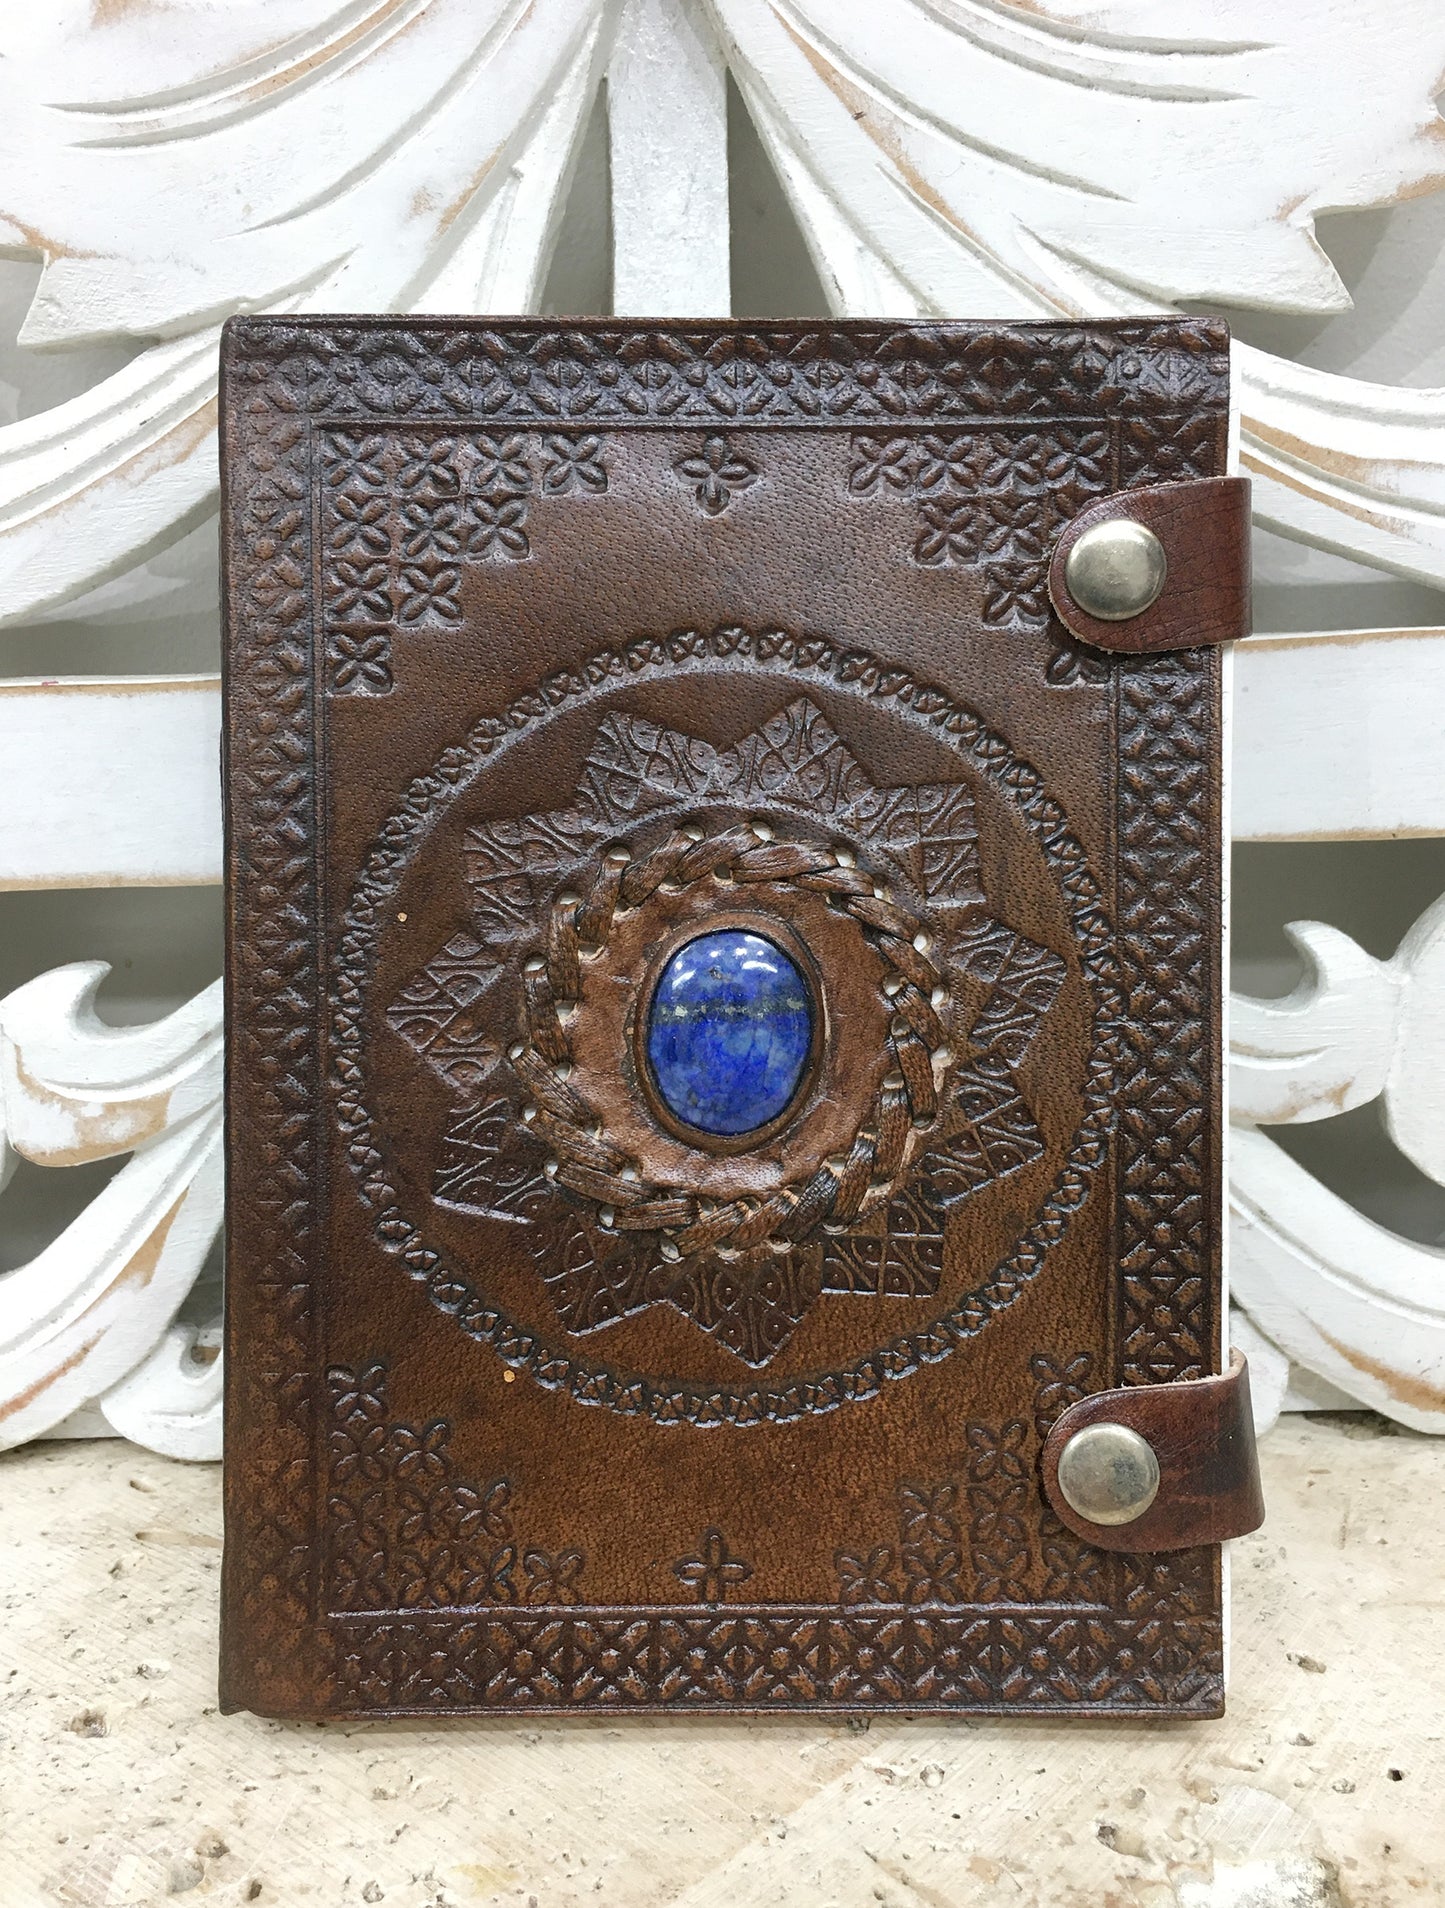 Hand Embossed Camel leather Journal with Gemstones & Button Clasp - 5" x 7" x 1"